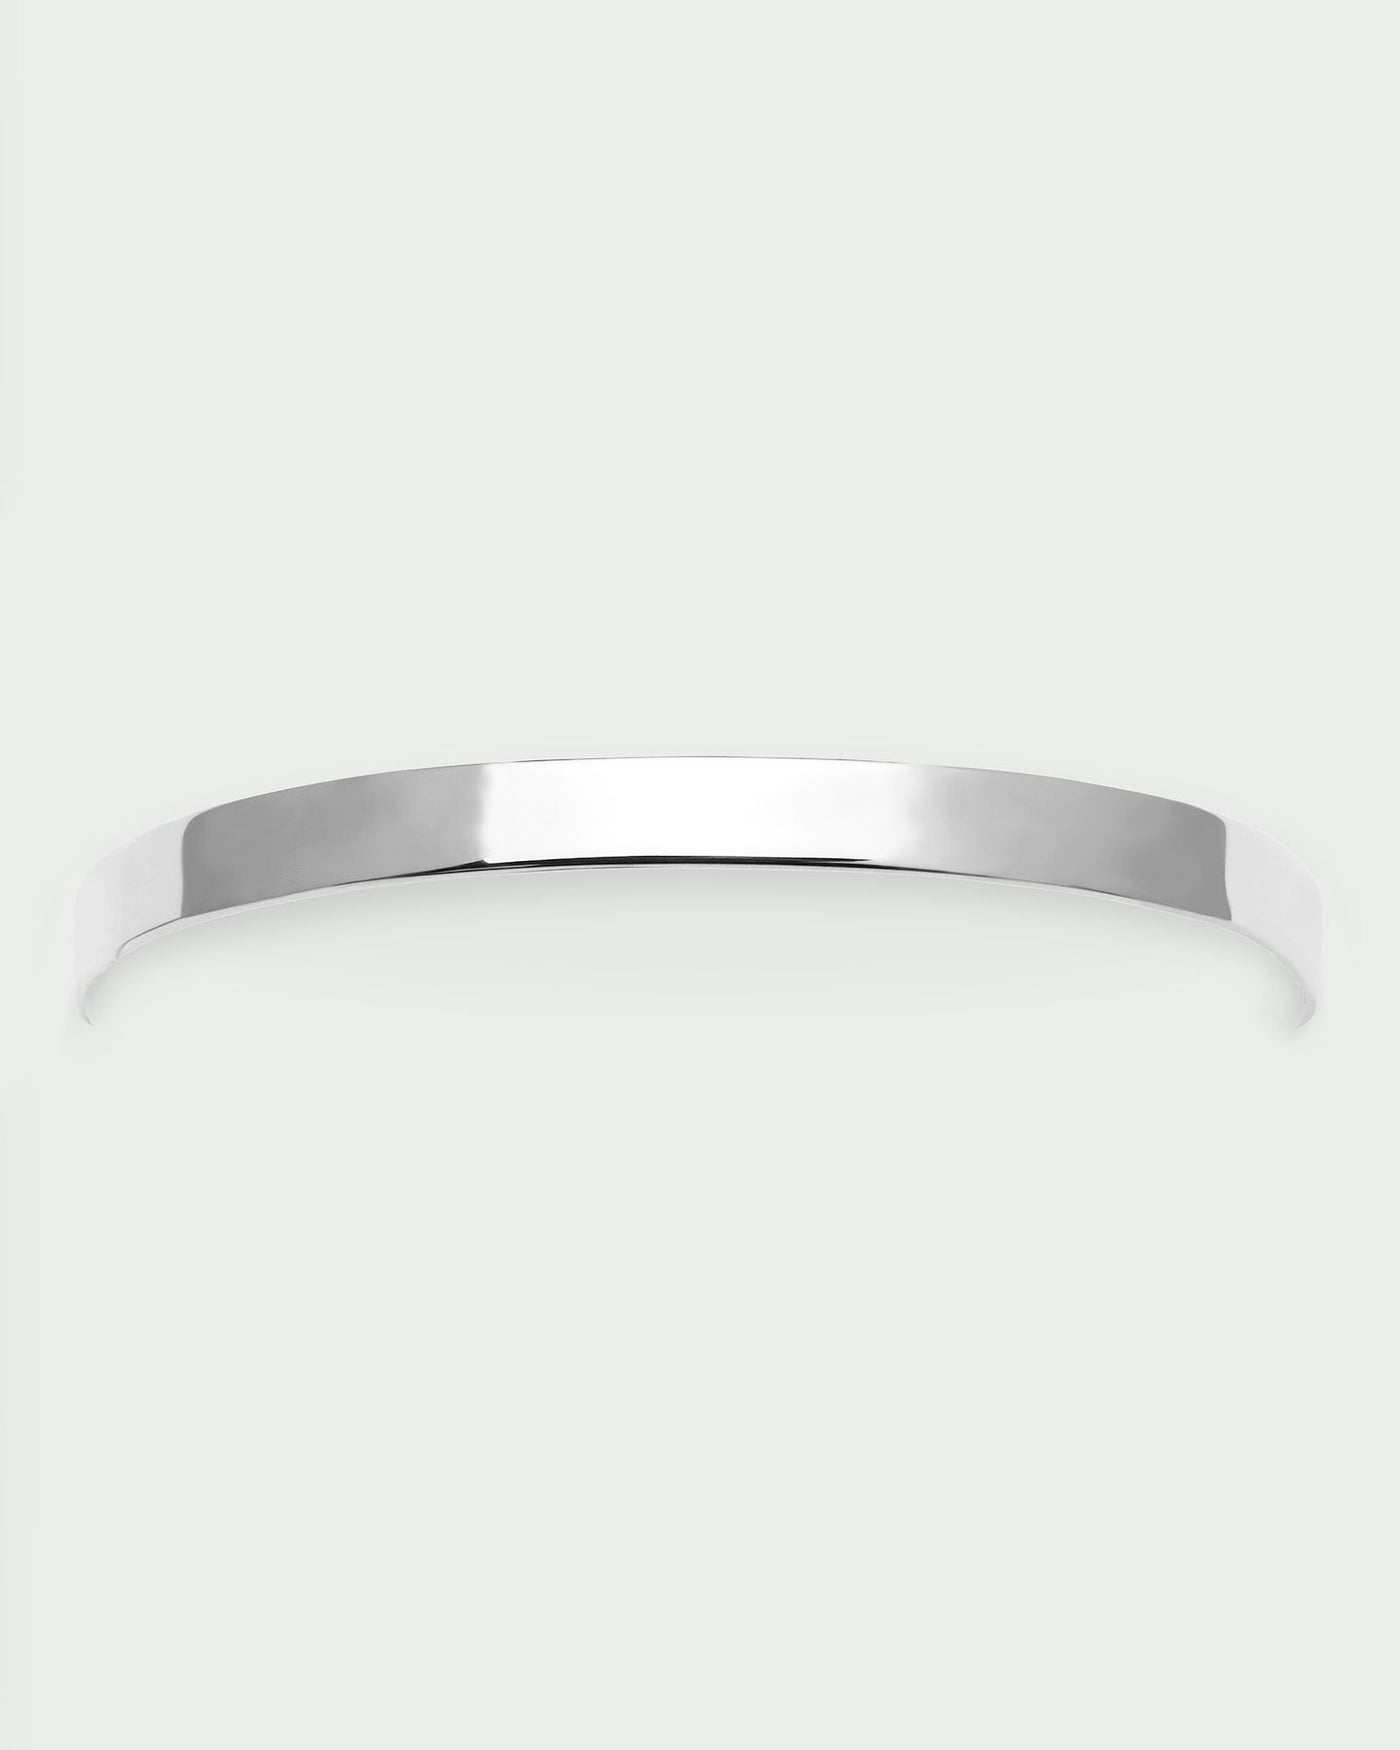 2024 Selection | Memora Silver Bracelet. Sterling silver cuff bracelet to personalize with engraving. Get the latest arrival from PDPAOLA. Place your order safely and get this Best Seller. Free Shipping.